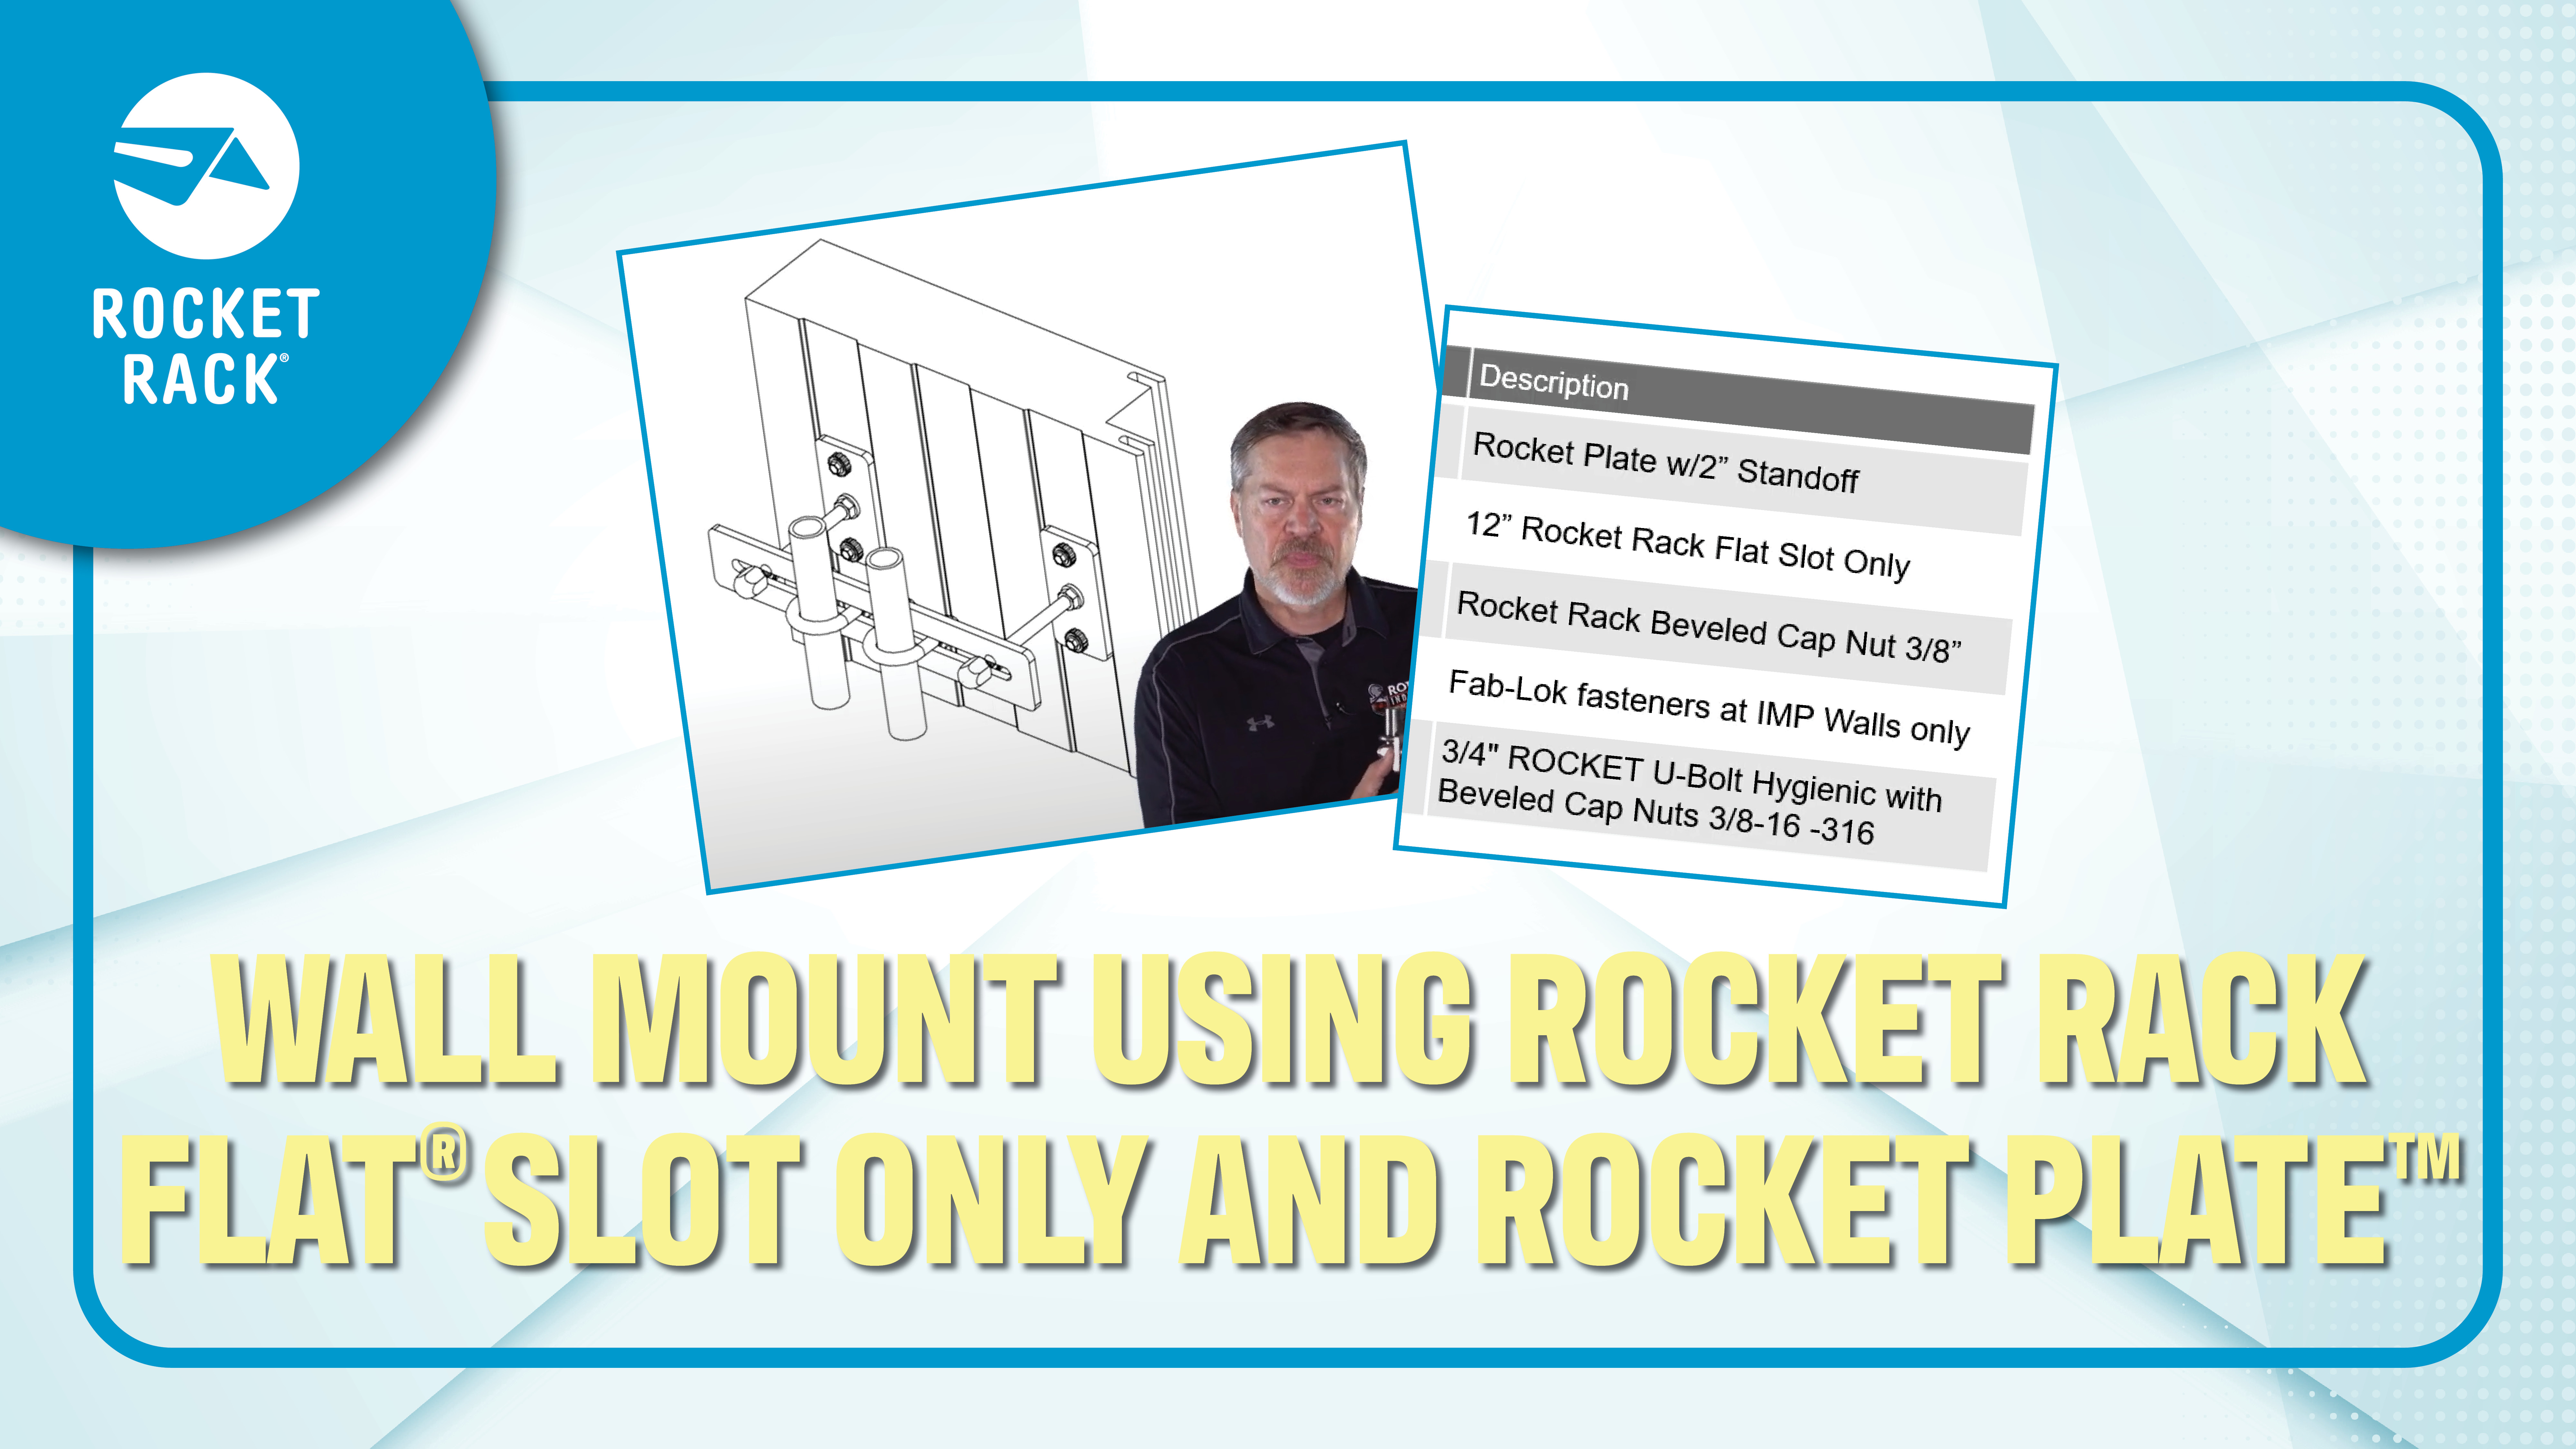 Wall Mount Flat Rack Slot Only and Rocket Plate